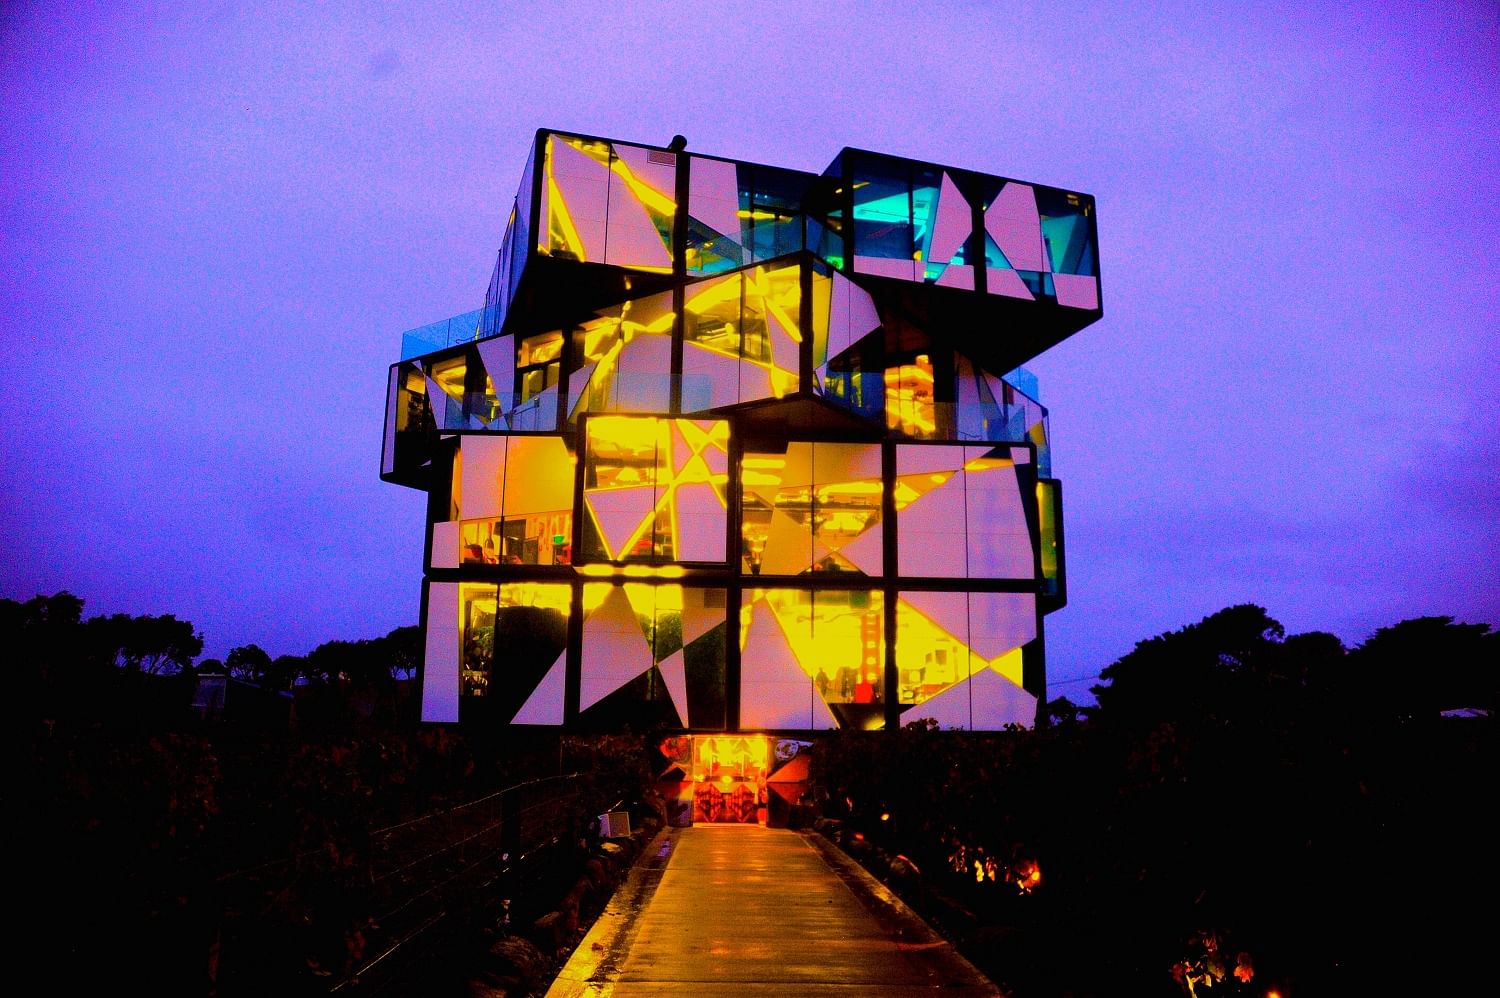 The facade of The Cube. Photo by author